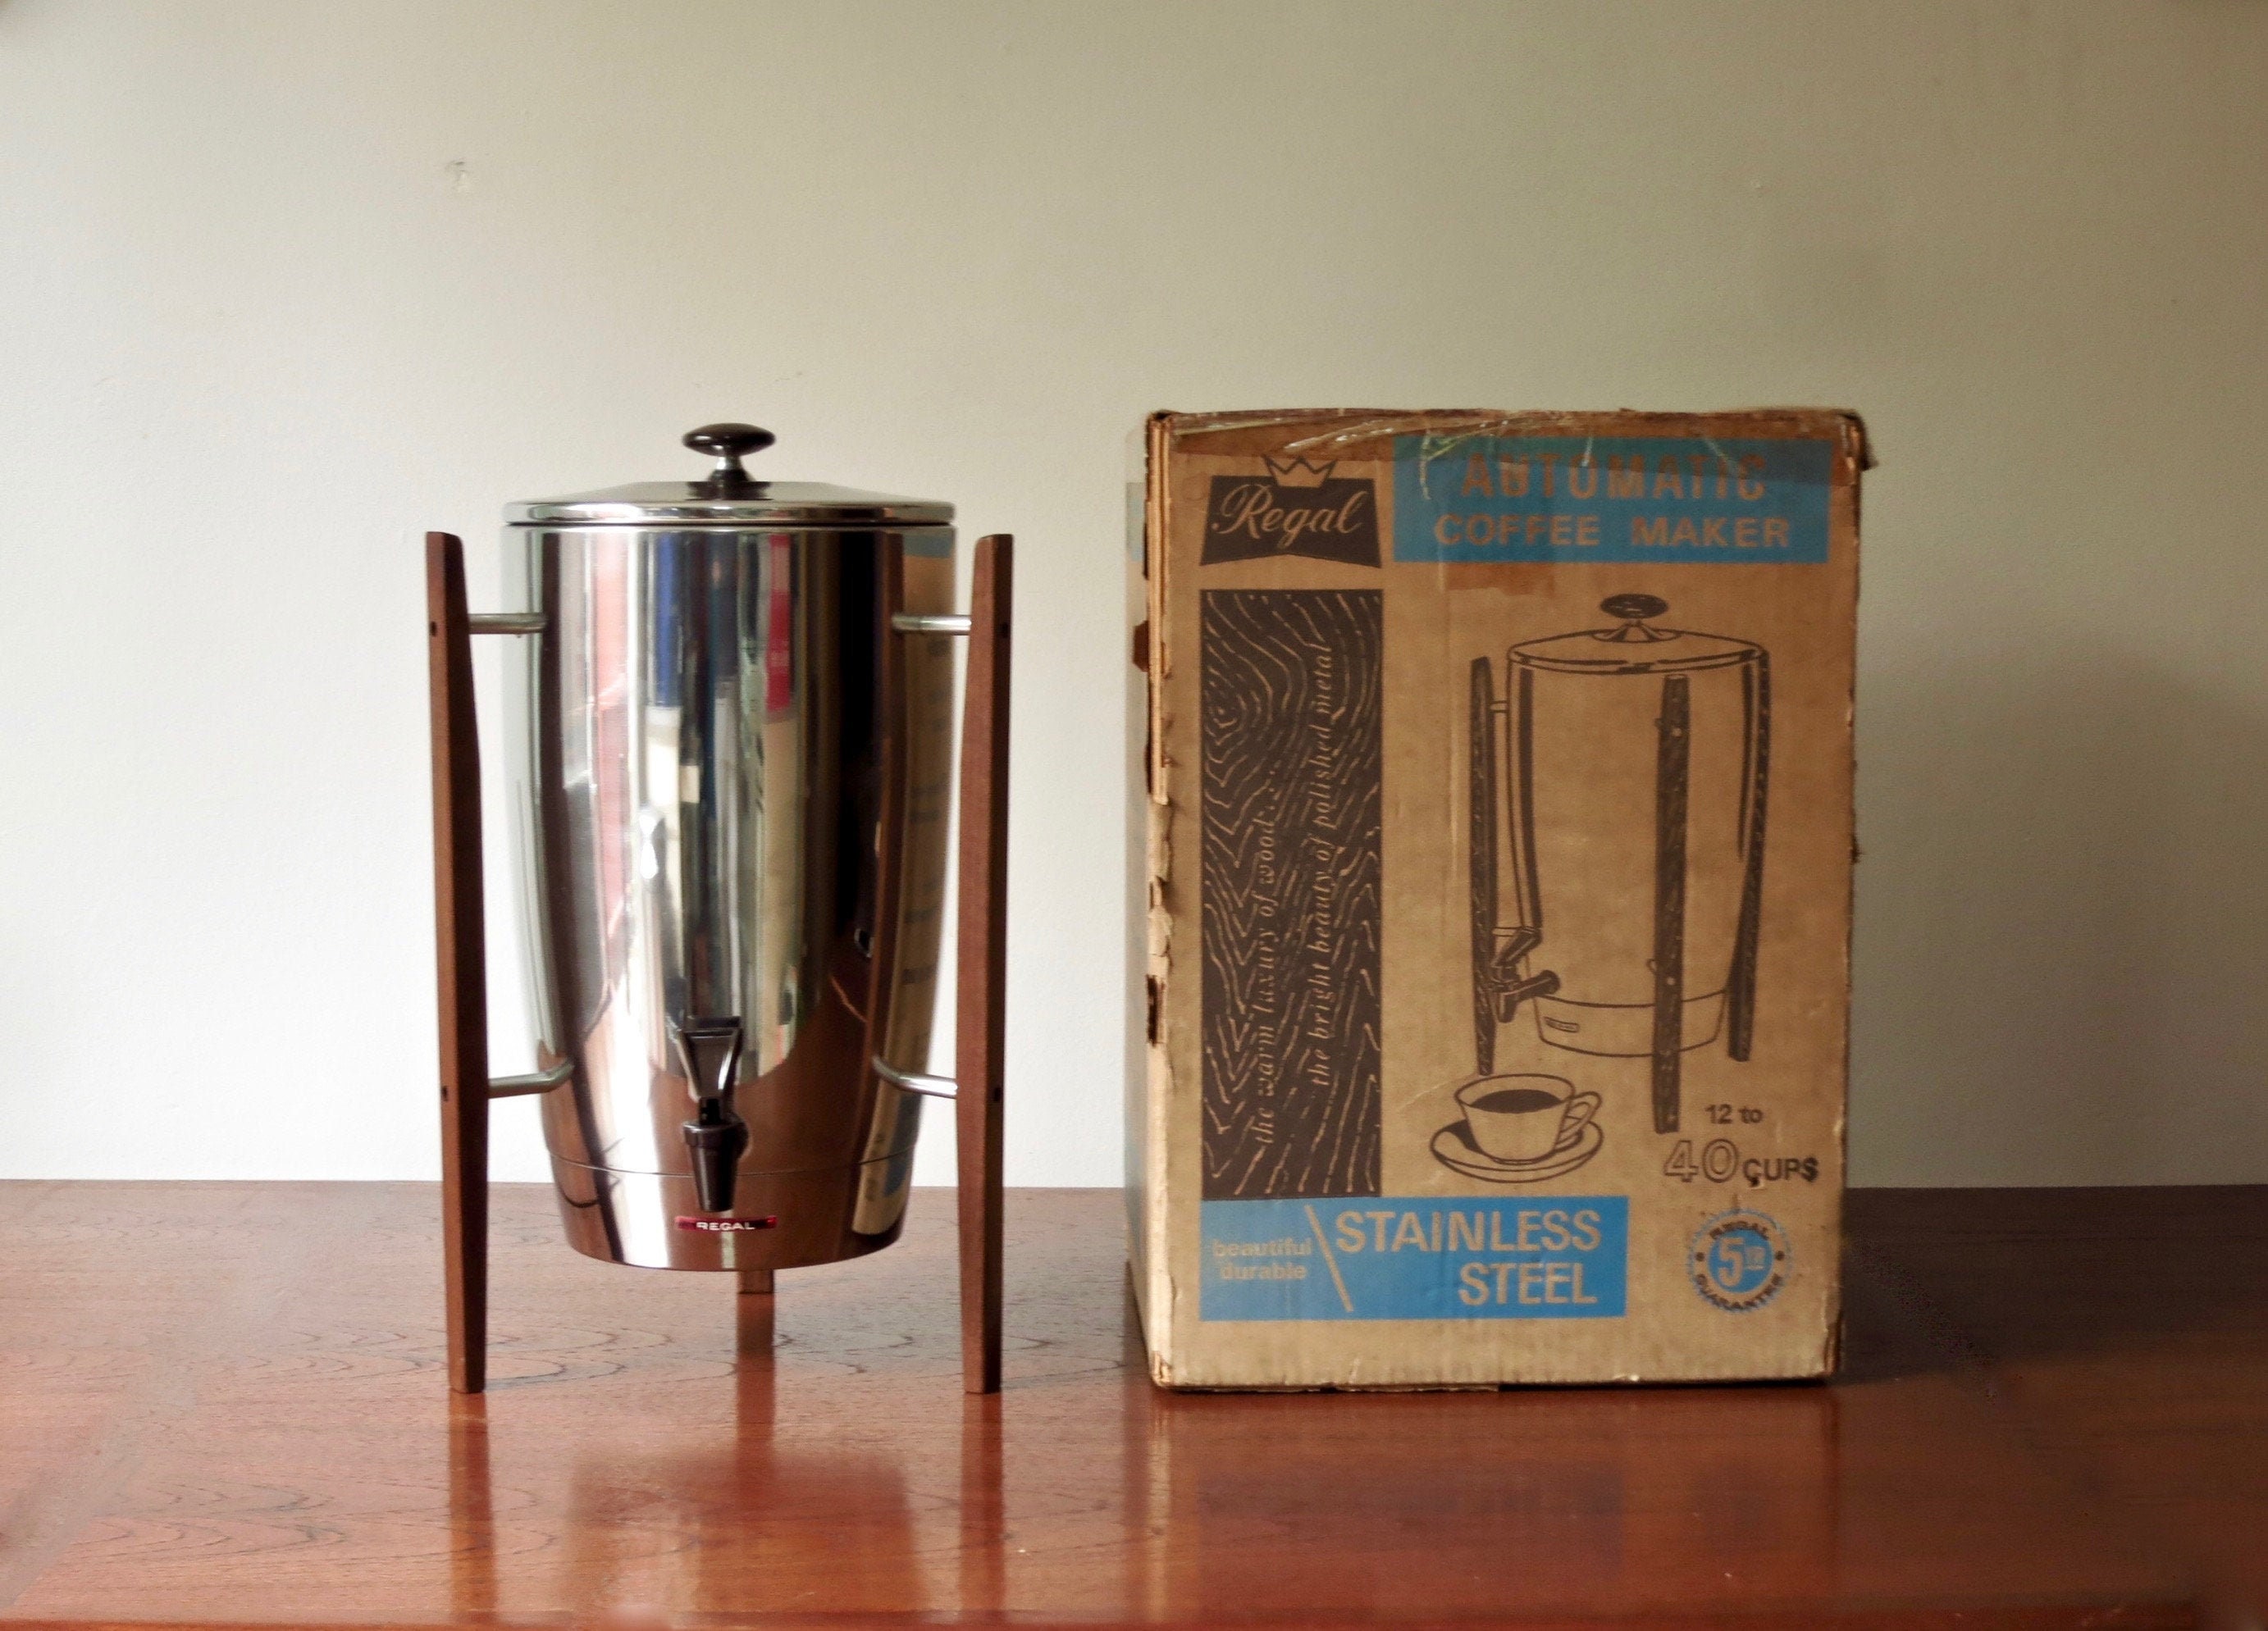 Regal Automatic 40 Cup Coffee Maker, Mid Century Modern, Space Age,  1950s-60s, Atomic Era, Vintage Model No 1350 